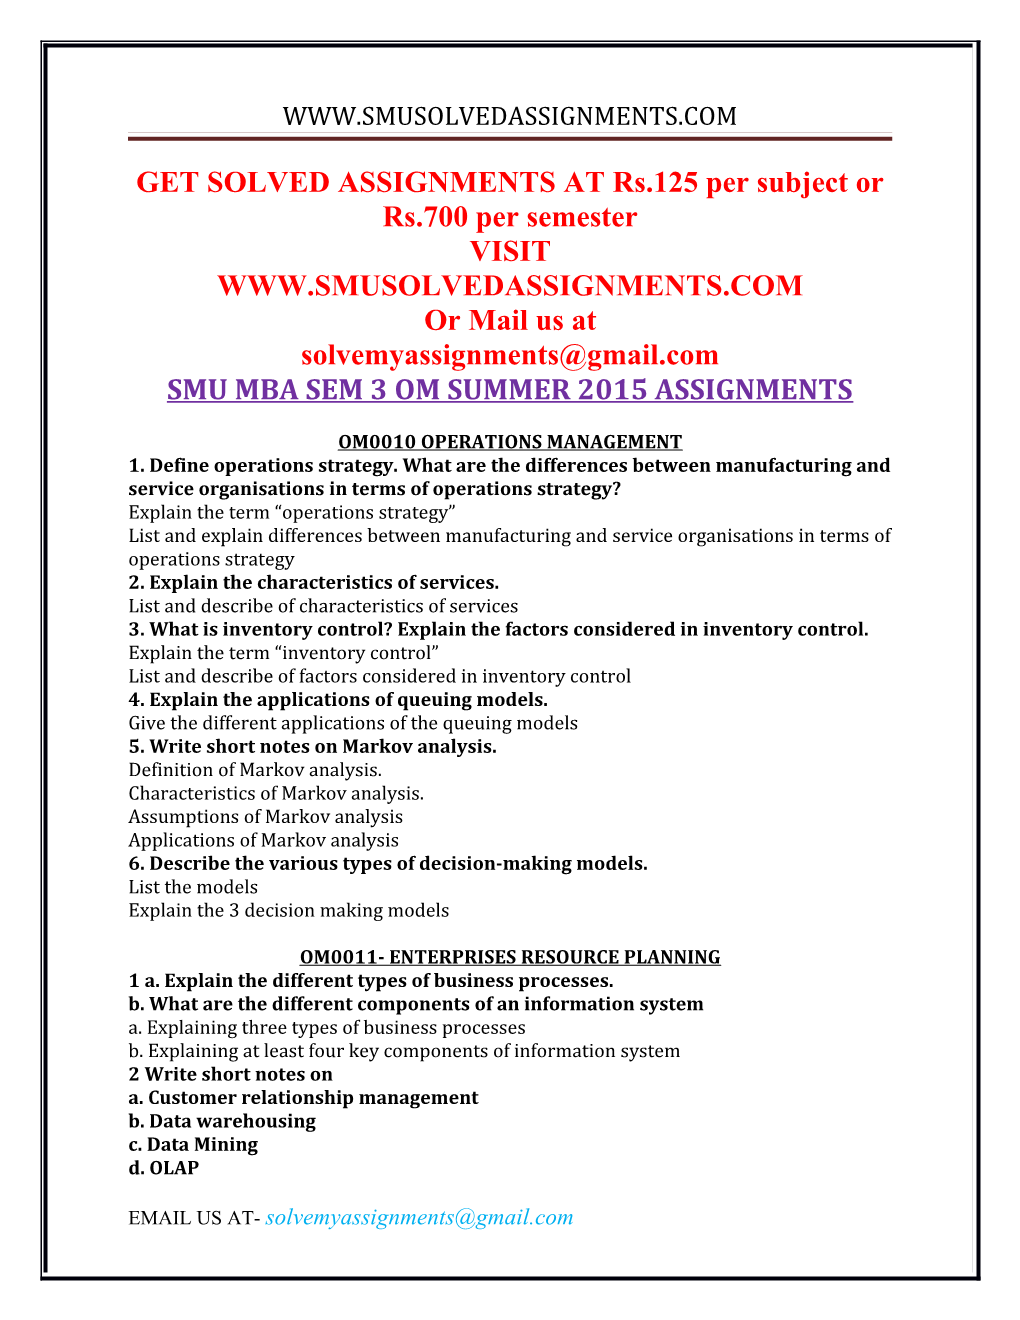 GET SOLVED ASSIGNMENTS at Rs.125 Per Subject Or Rs.700 Per Semester s2